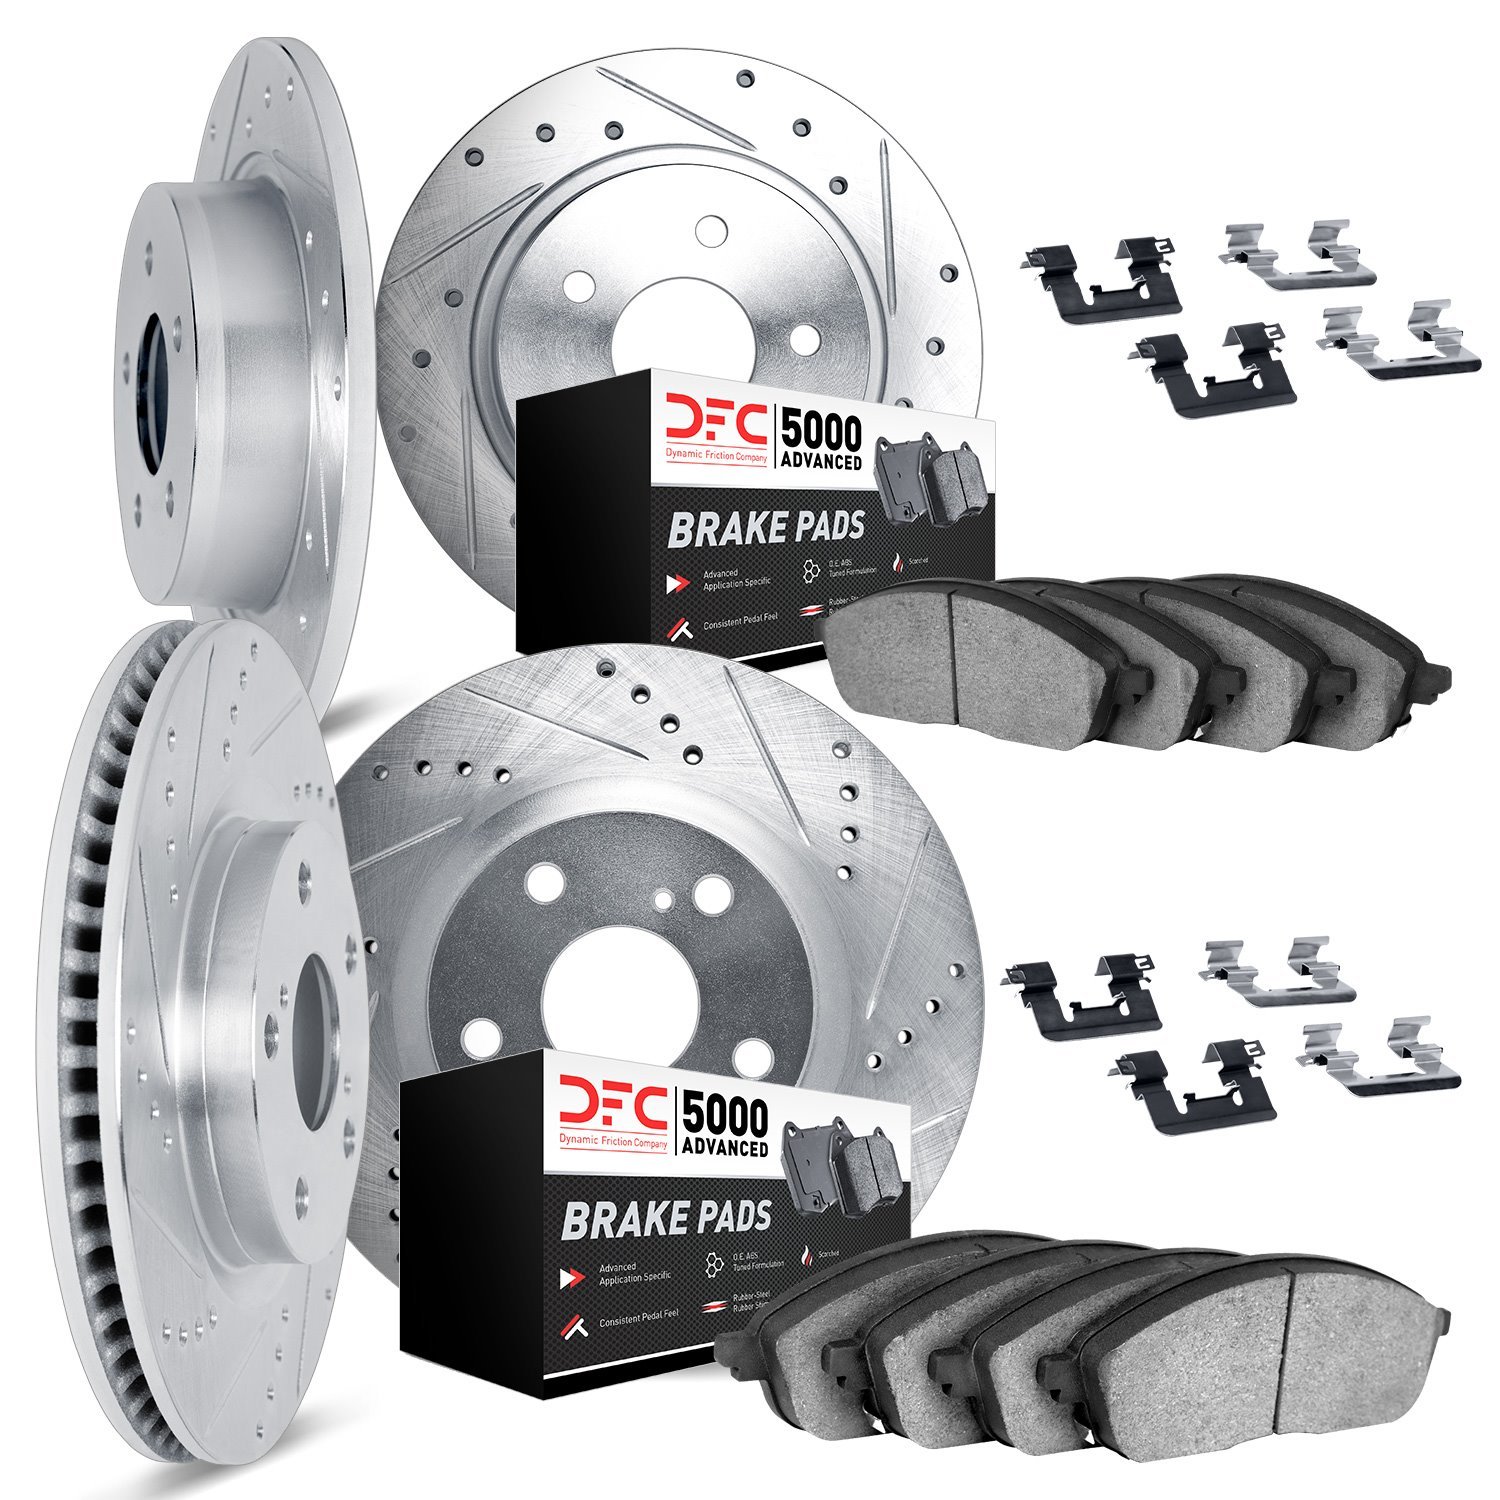 7514-67118 Drilled/Slotted Brake Rotors w/5000 Advanced Brake Pads Kit & Hardware [Silver], Fits Select Infiniti/Nissan, Positio